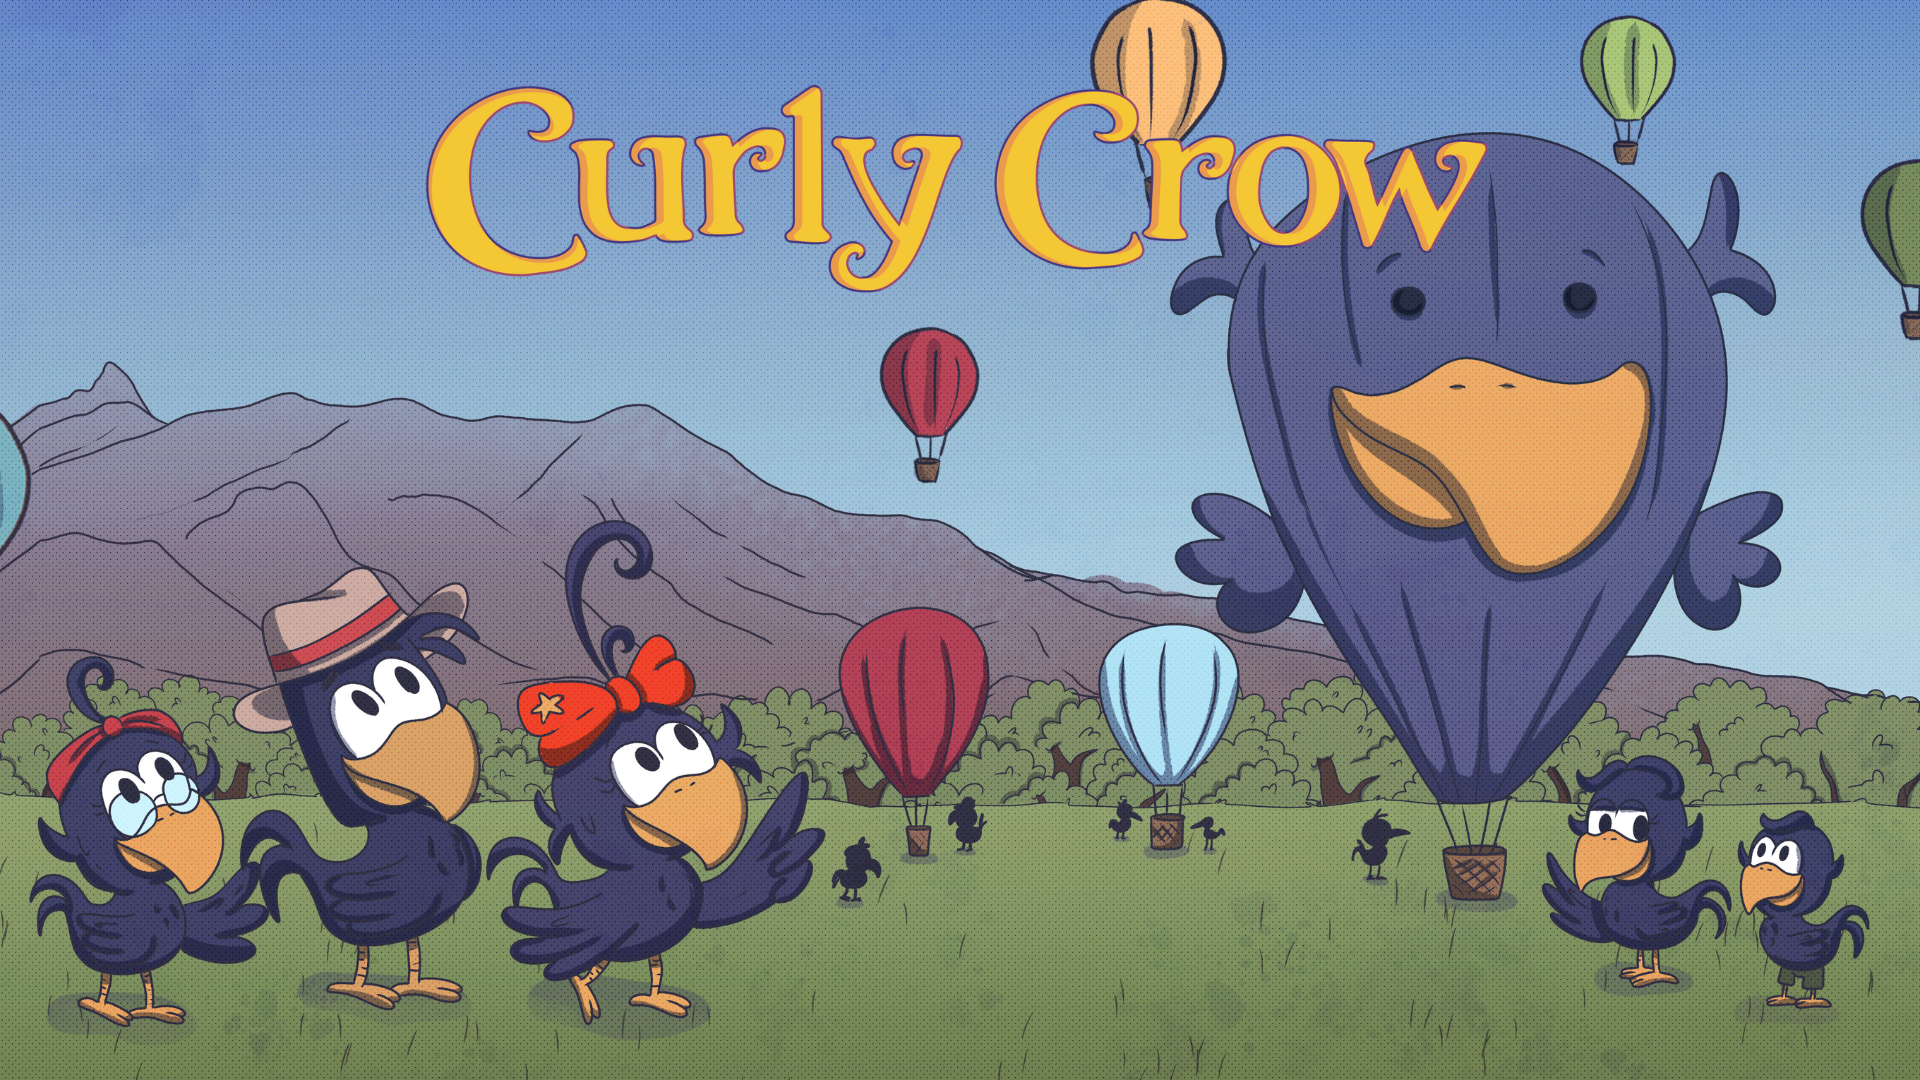 Curly Crow Kids Books Fiesta Party with Hot Air Balloons Special Shape Balloon